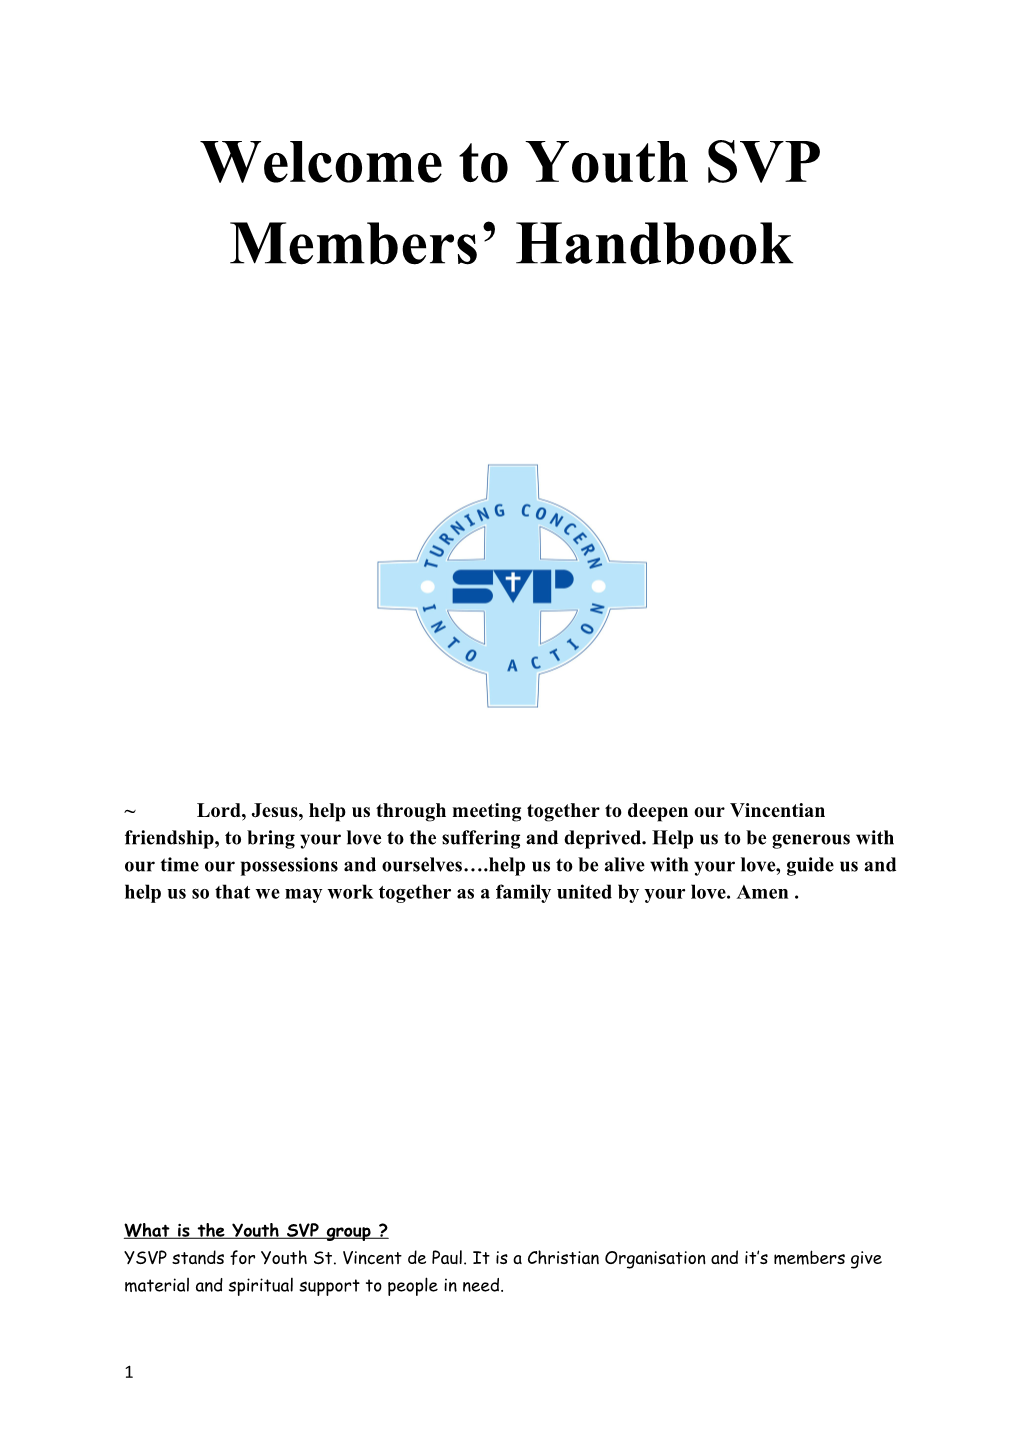 Welcome to Youth SVP Members Handbook